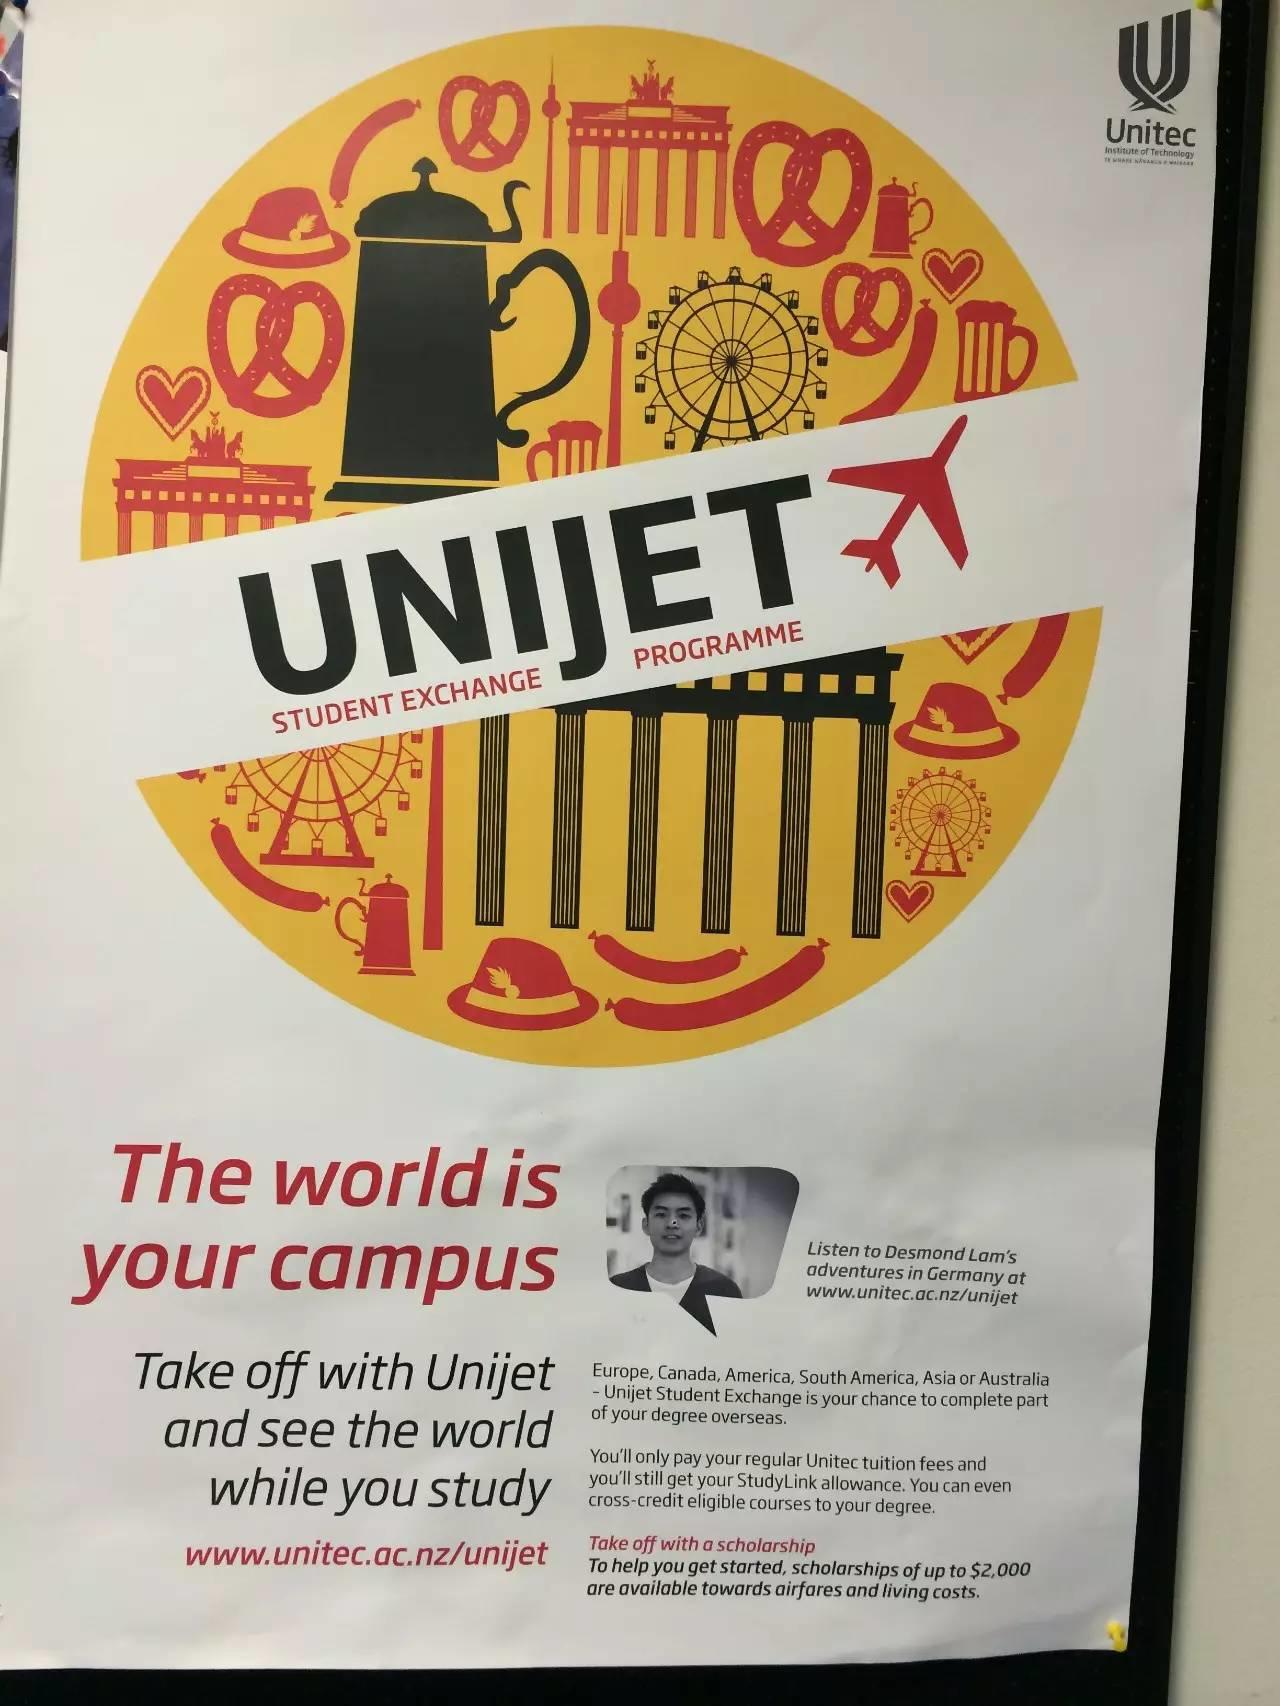 Unijet  全球学习带你飞！The world is your campus！